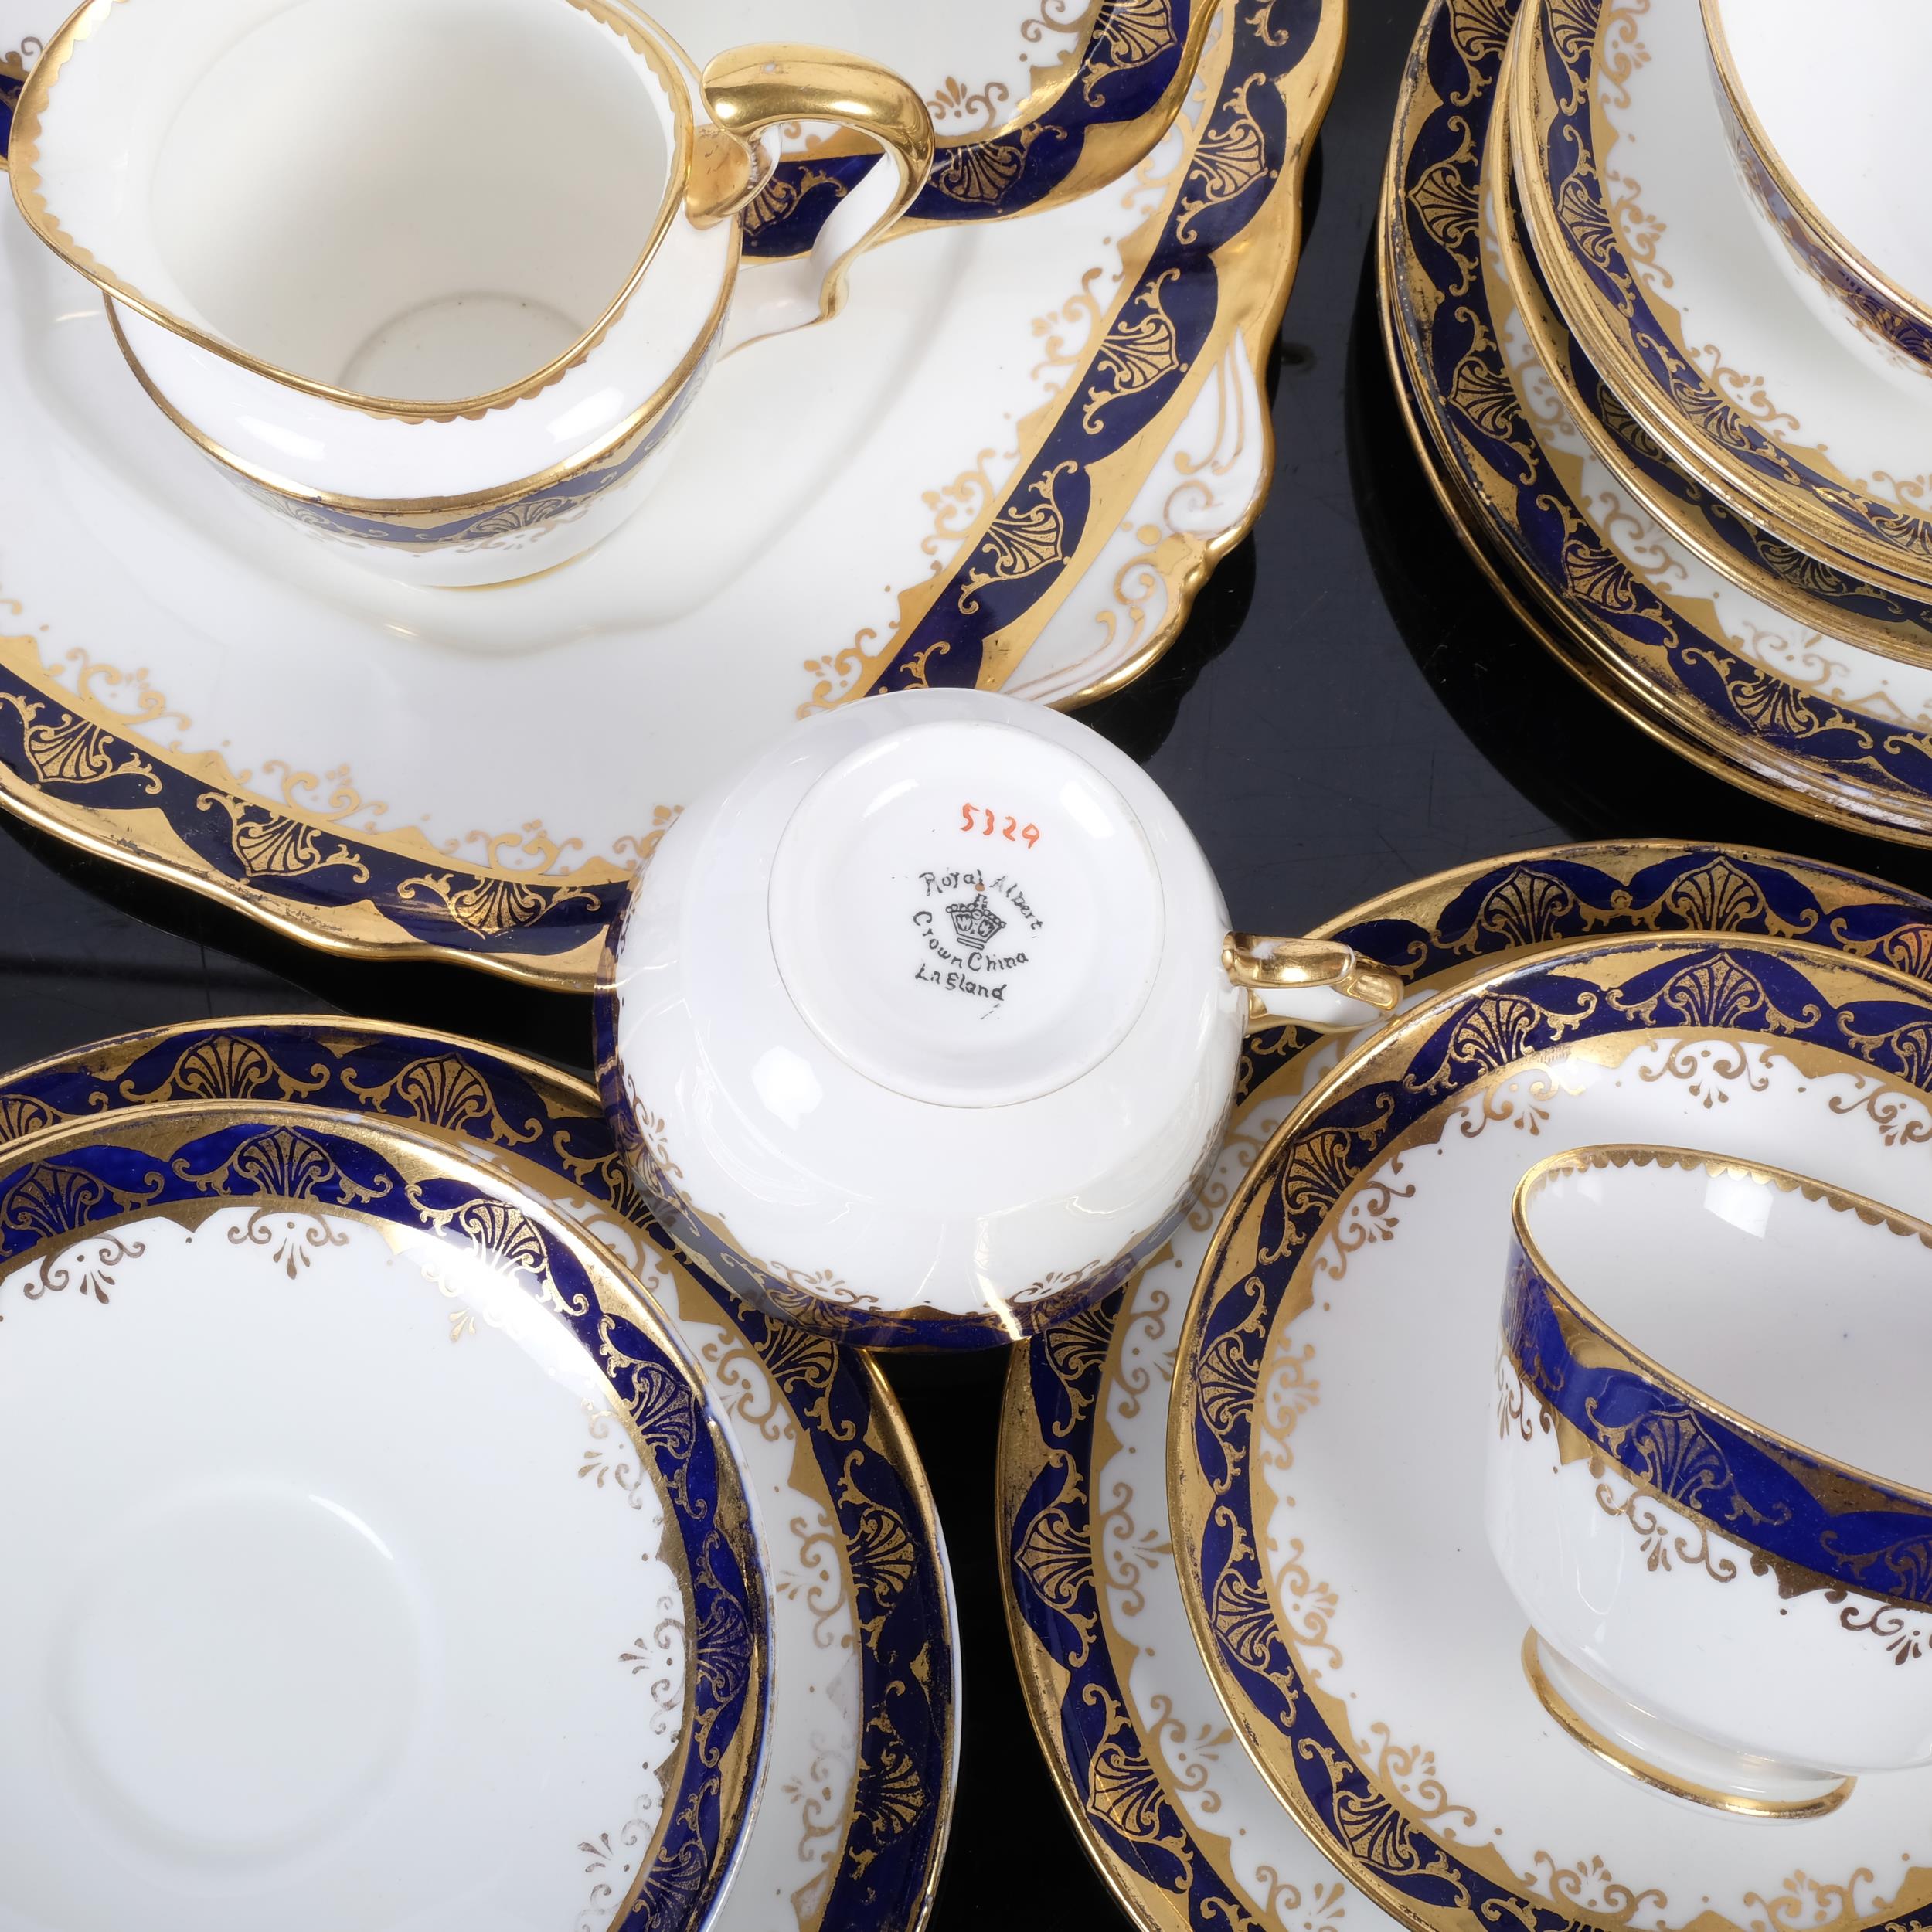 Early Royal Albert Crown china tea set for 5 people, with cobalt blue and gilt patterned borders, - Image 2 of 2